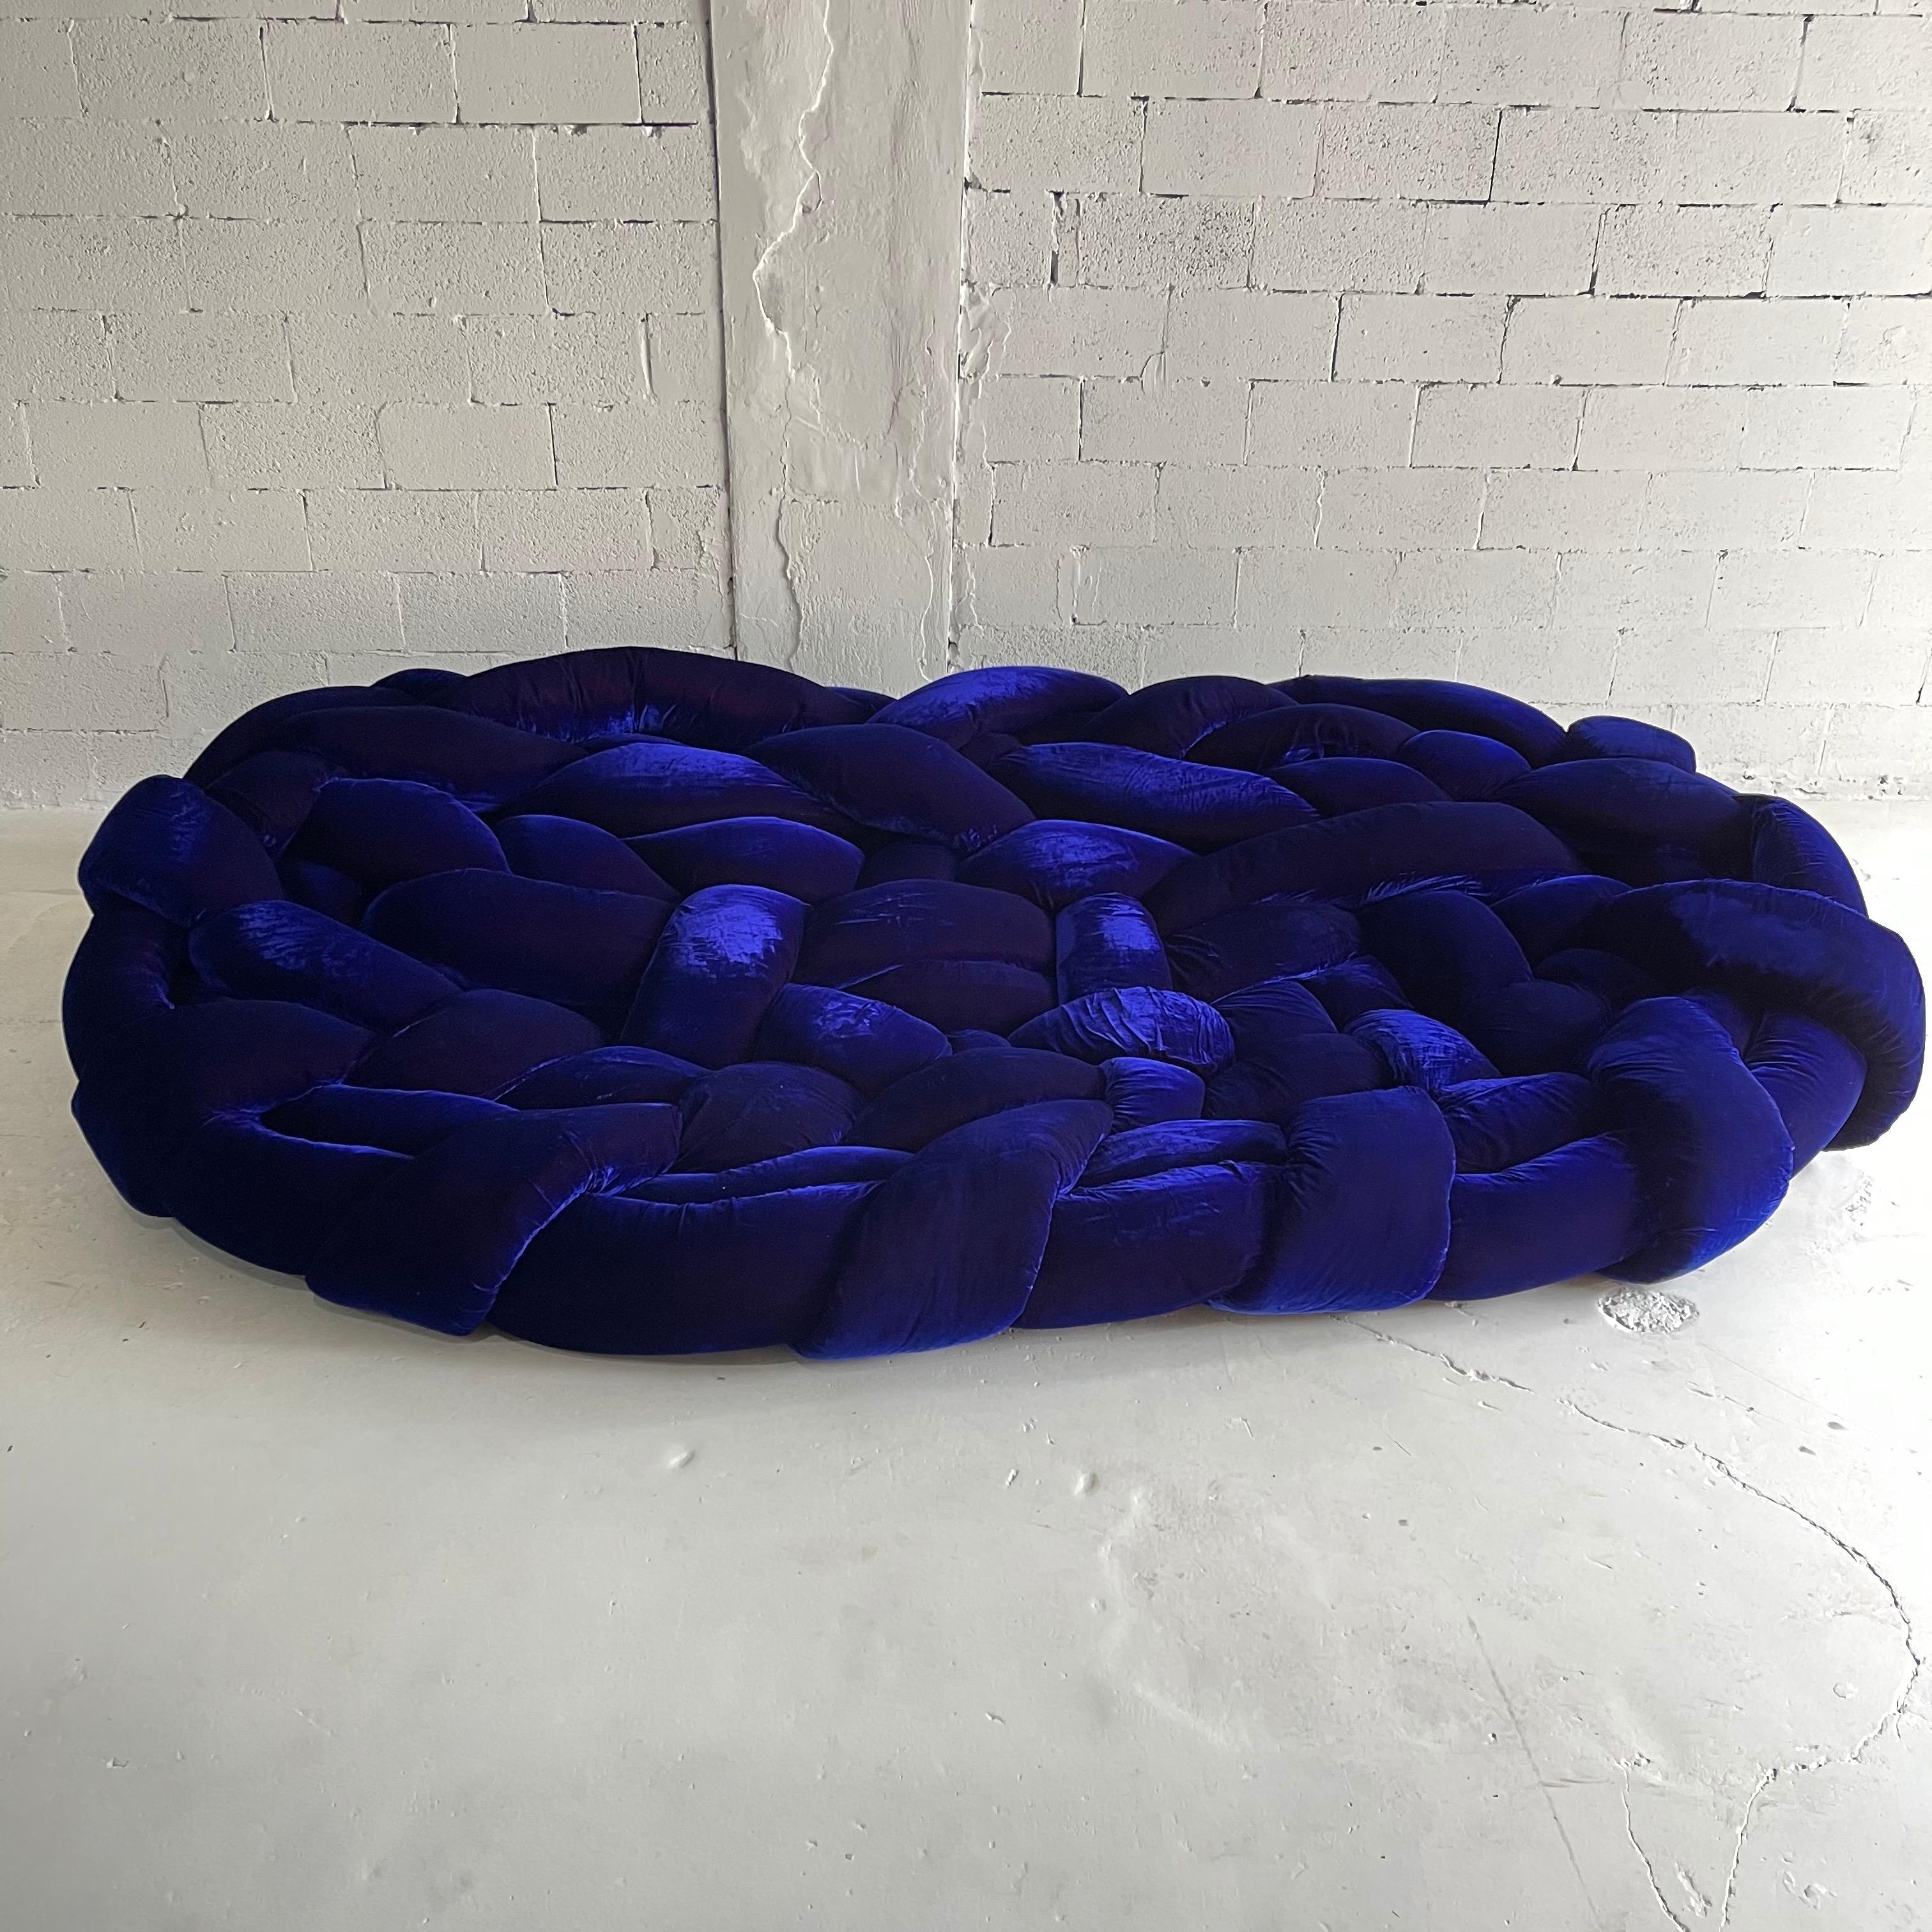 Excellent example of the creative talents of the Campana Bros. The Boa sofa, a woven nest constructed of 120 meters of polyurethane and goose feather tubing covered in a sumptuous iridescent Blue Violet velvet. The version is the largest size. A